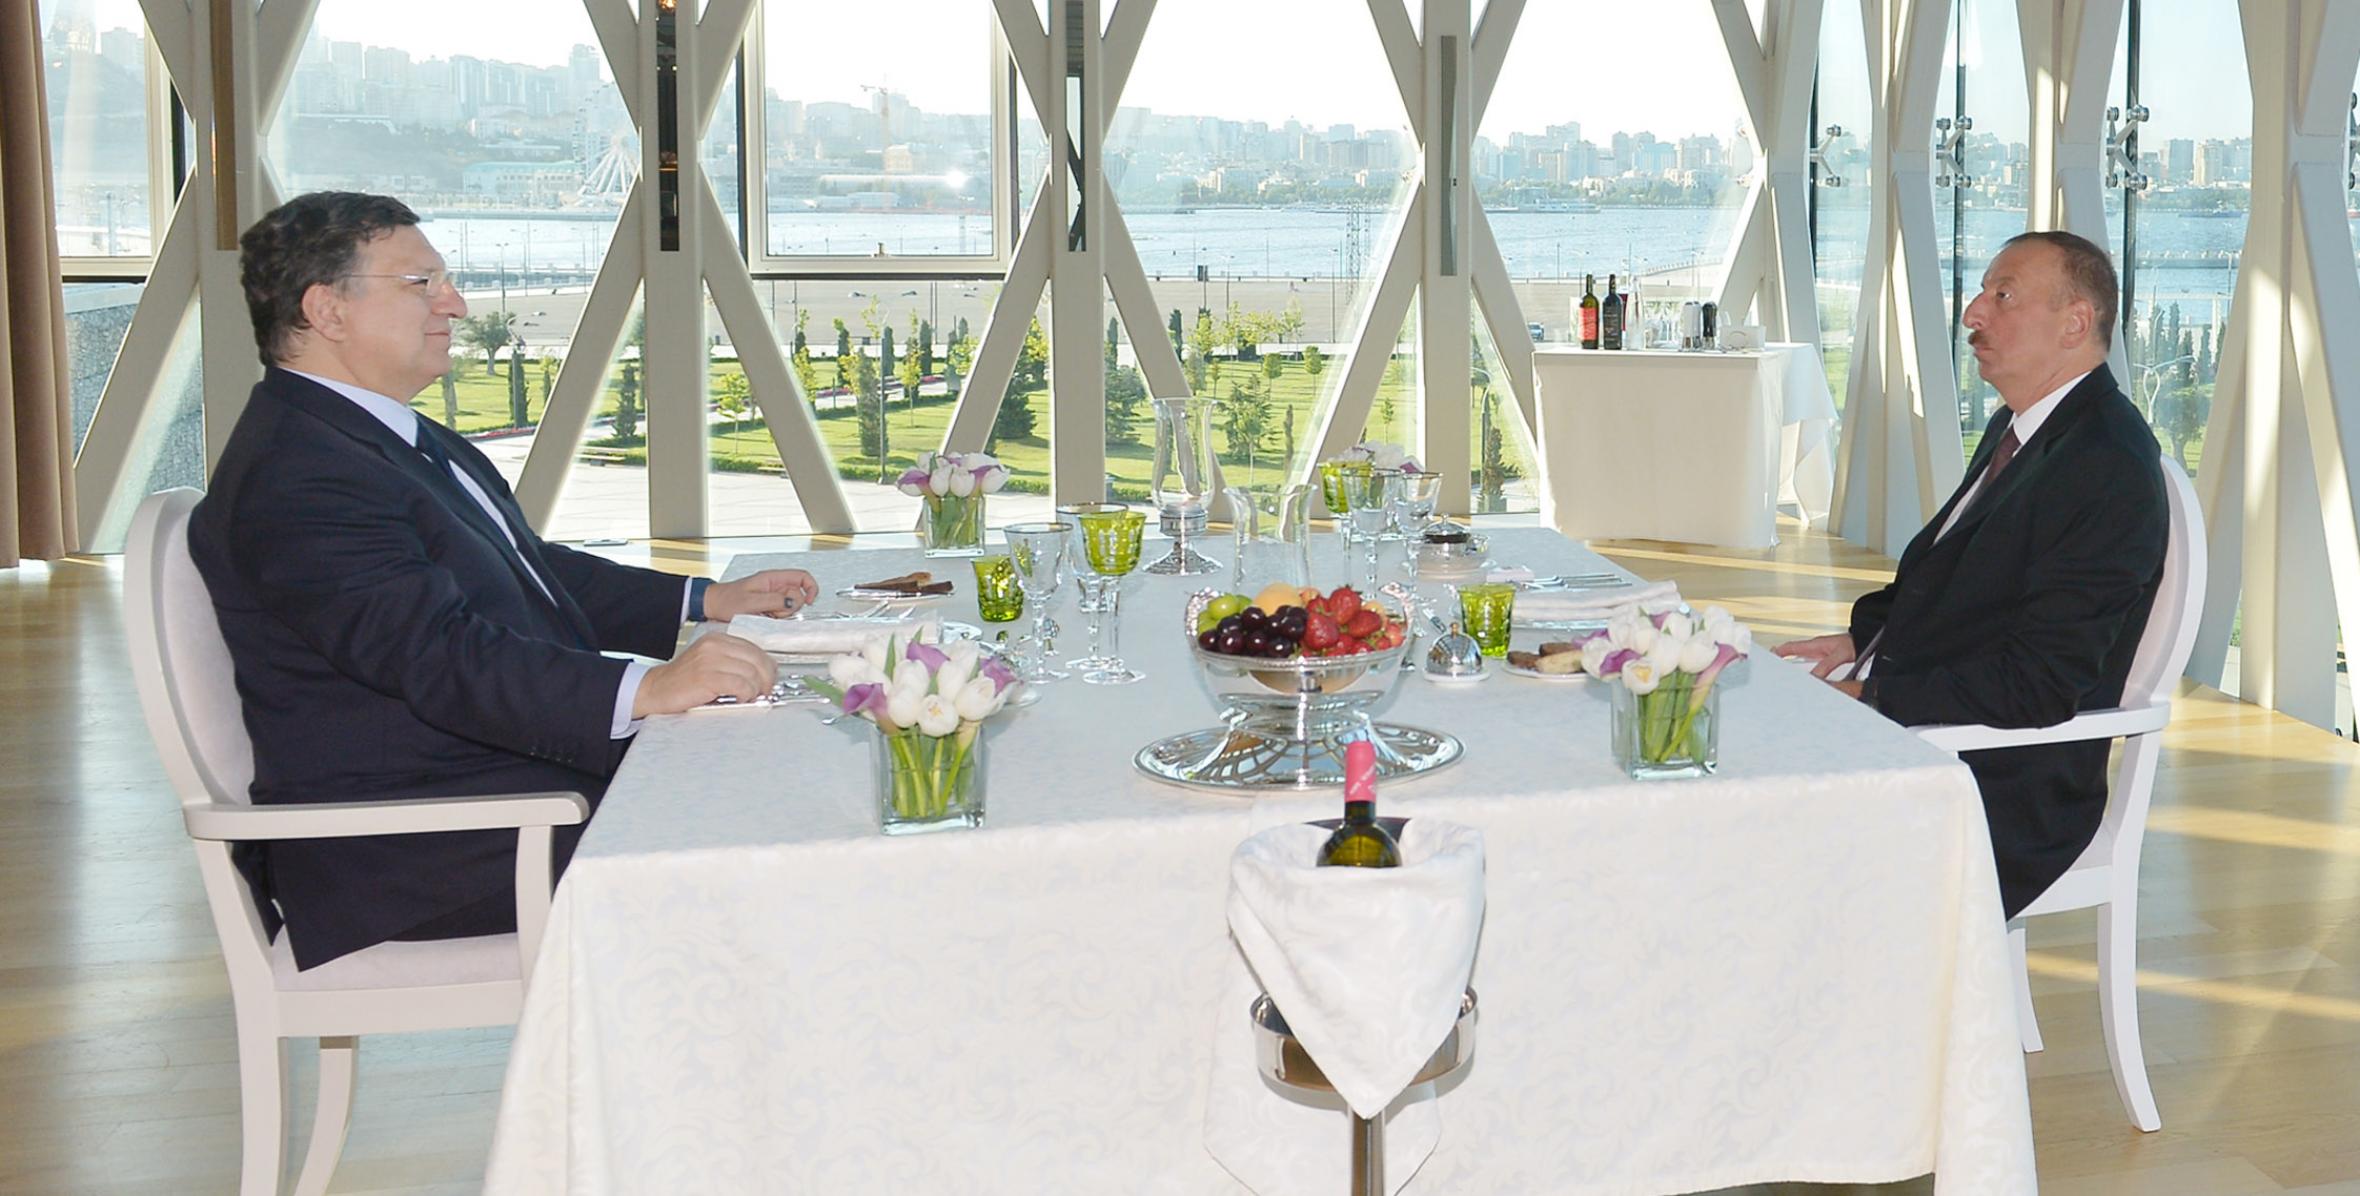 Ilham Aliyev and President of the European Commission Jose Manuel Barroso had a dinner together